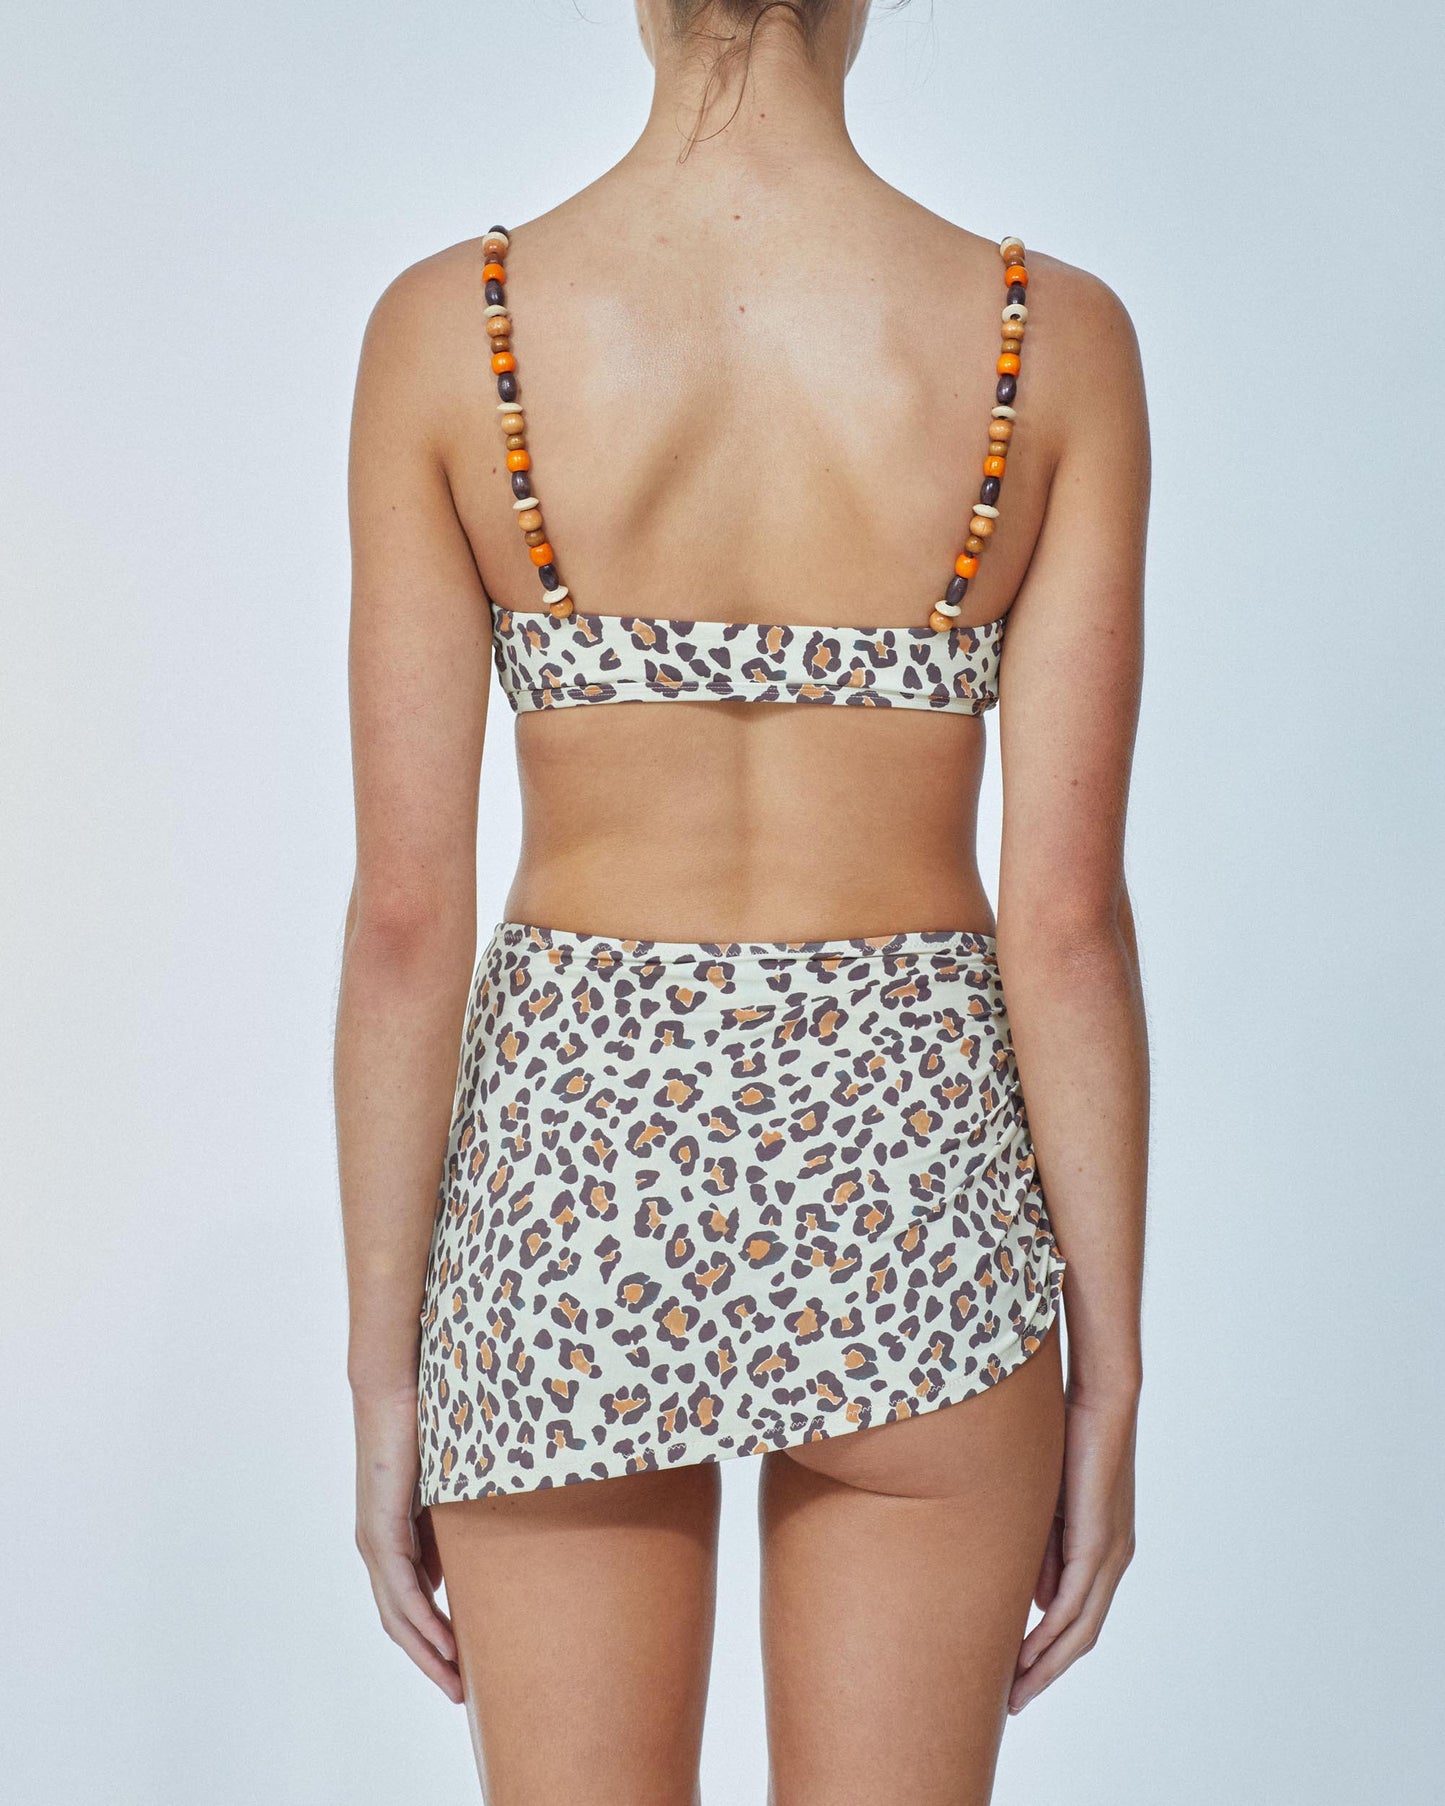 It's Now Cool Maillots de bain - The Rouch Pant - Cheetah